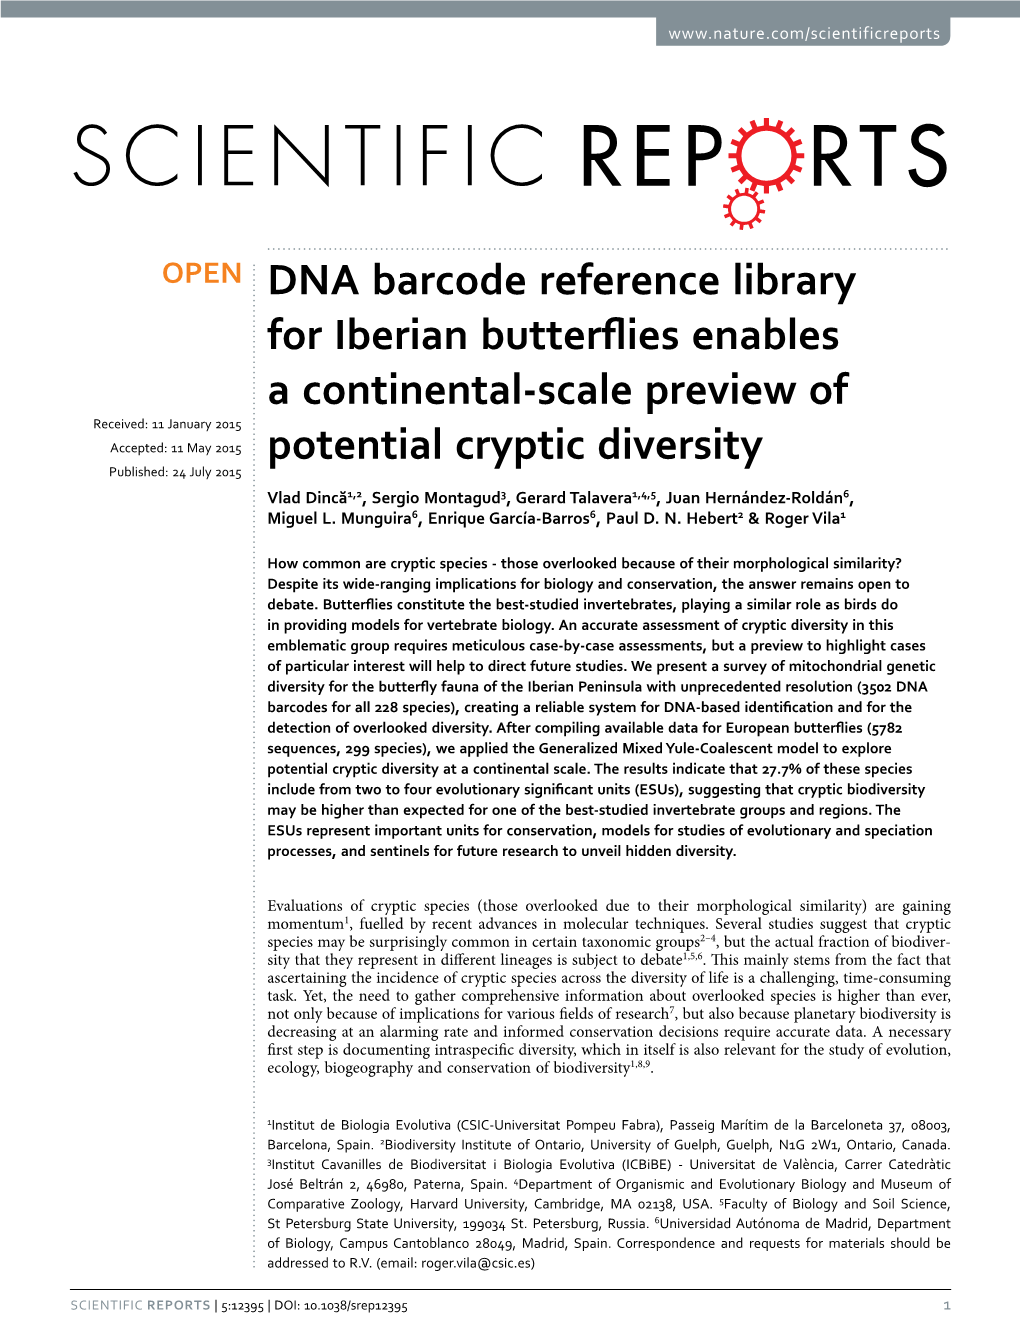 DNA Barcode Reference Library for Iberian Butterflies